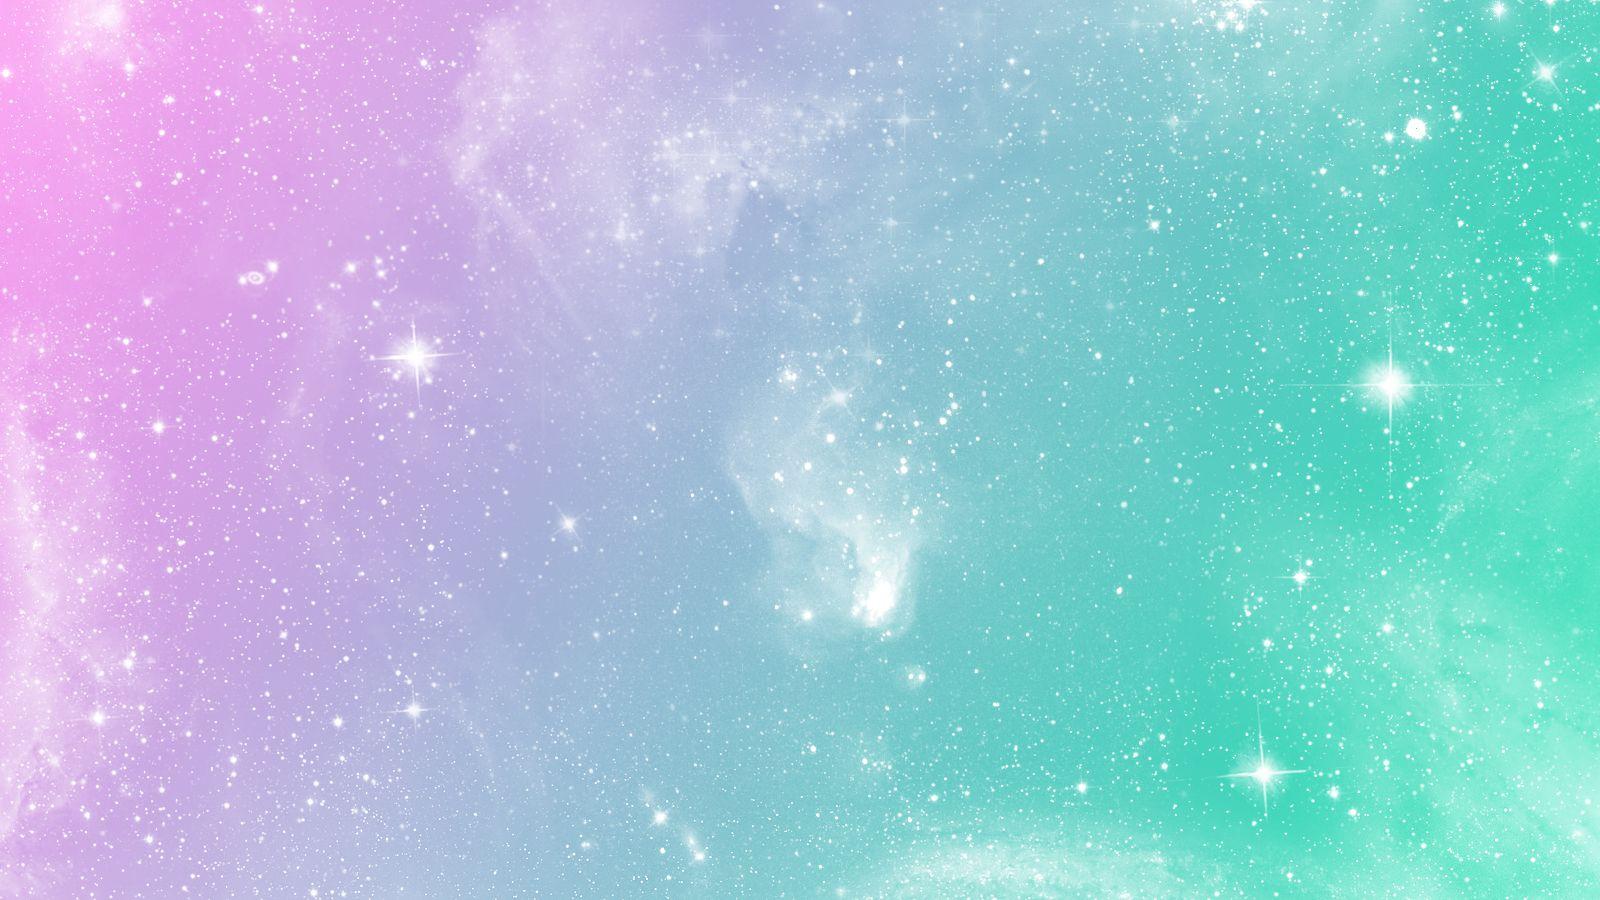 Pastel Aesthetic Green Galaxy Background